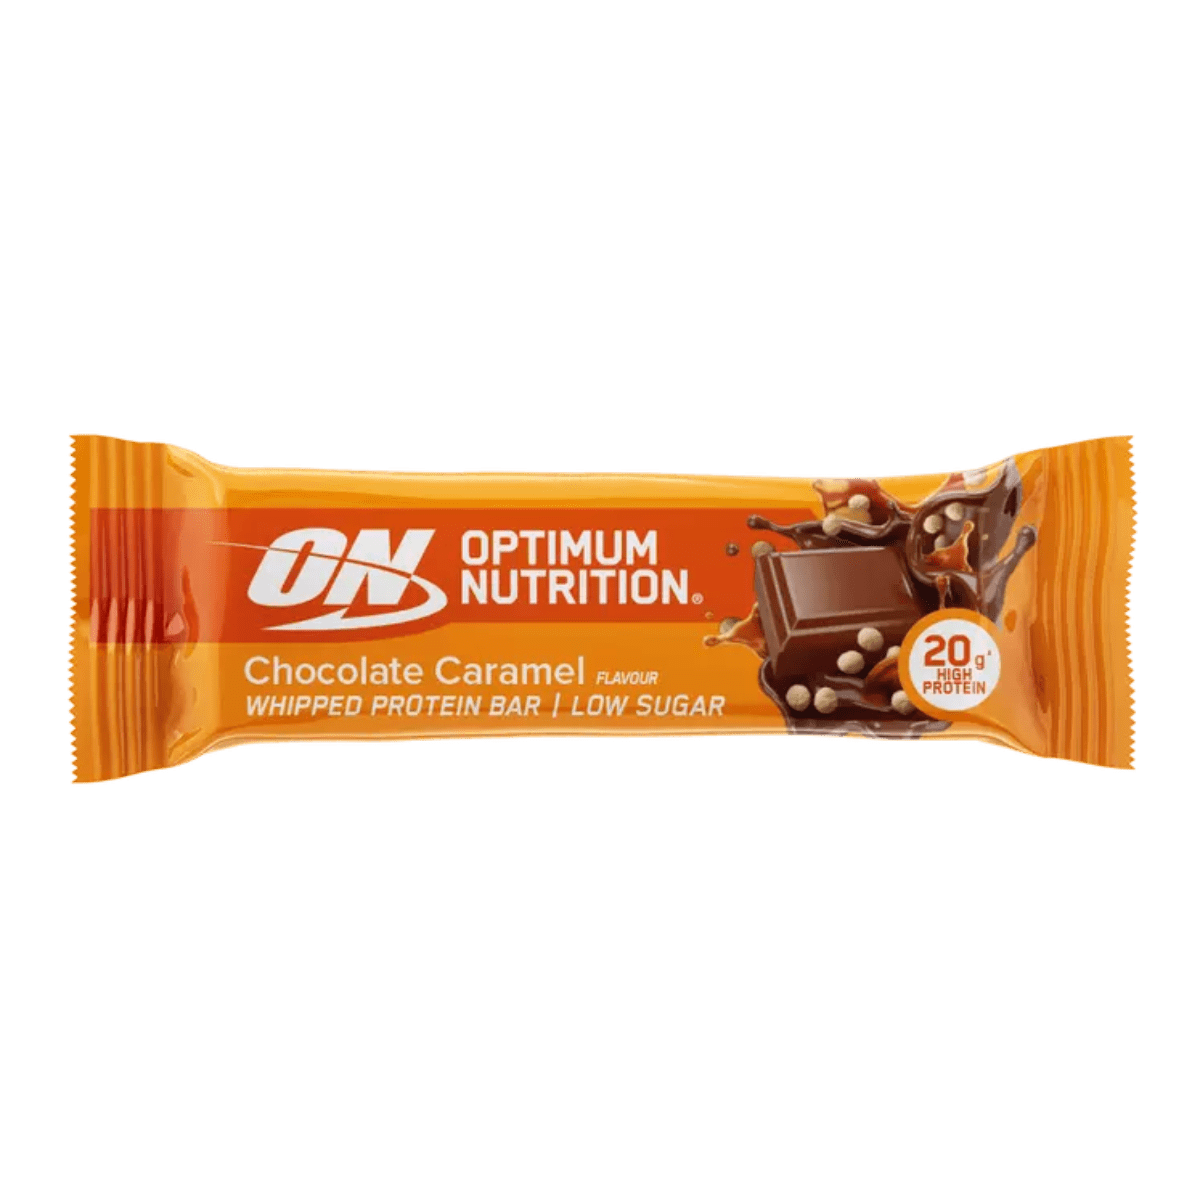 Optimum Nutrition Whipped Protein Bar